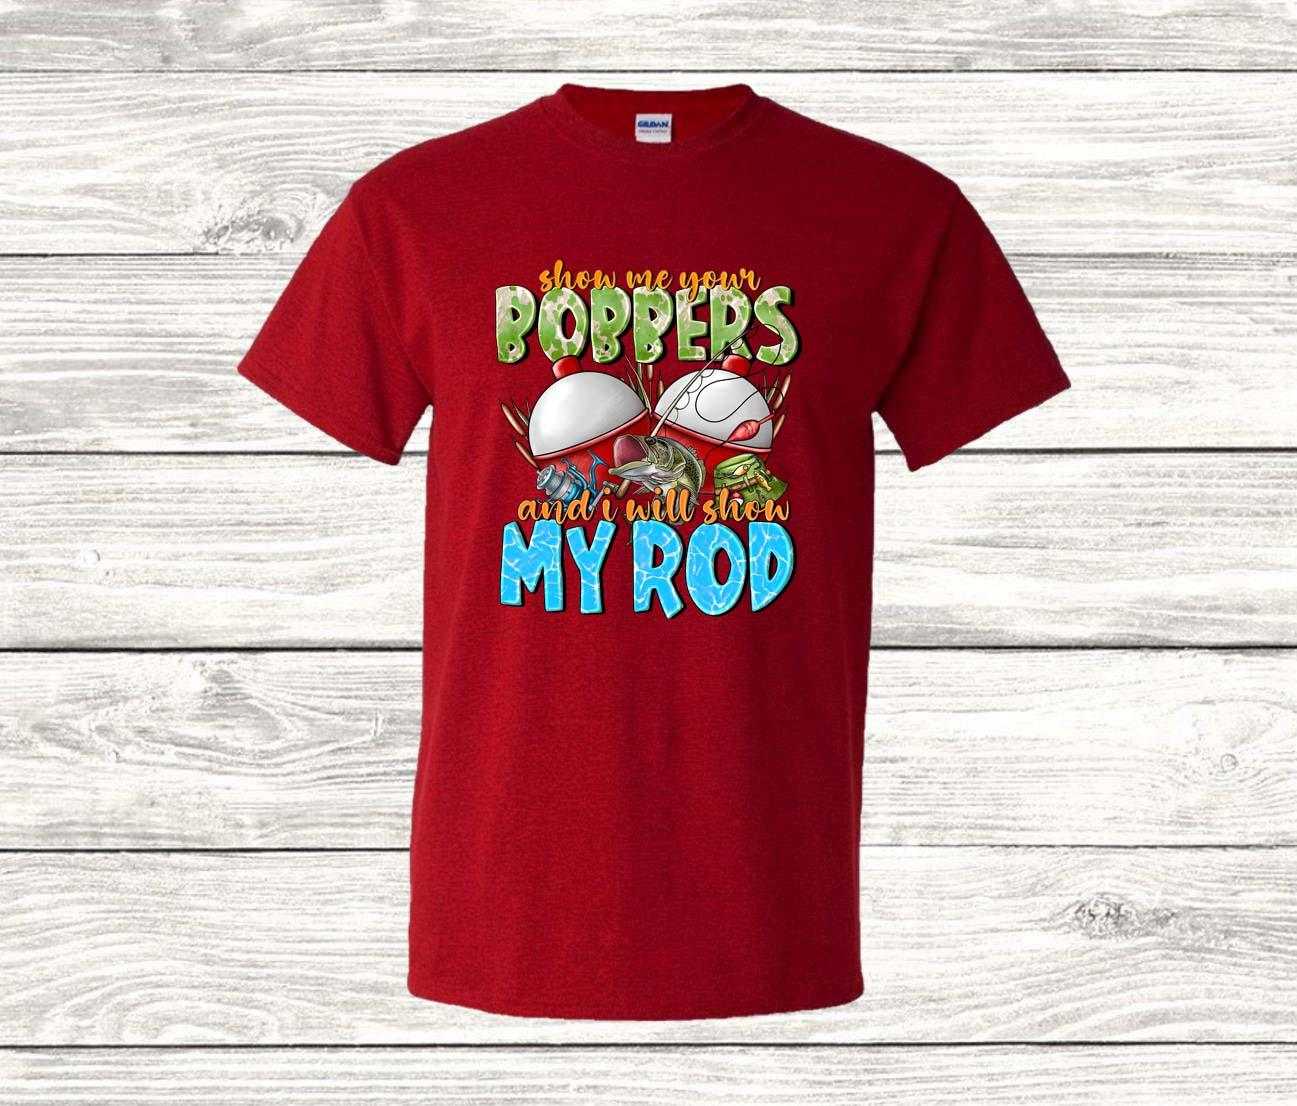 Show Me Your Bobbers, I Will Show My Rod T Shirt, Fishing T Shirt - Imagine With Aloha